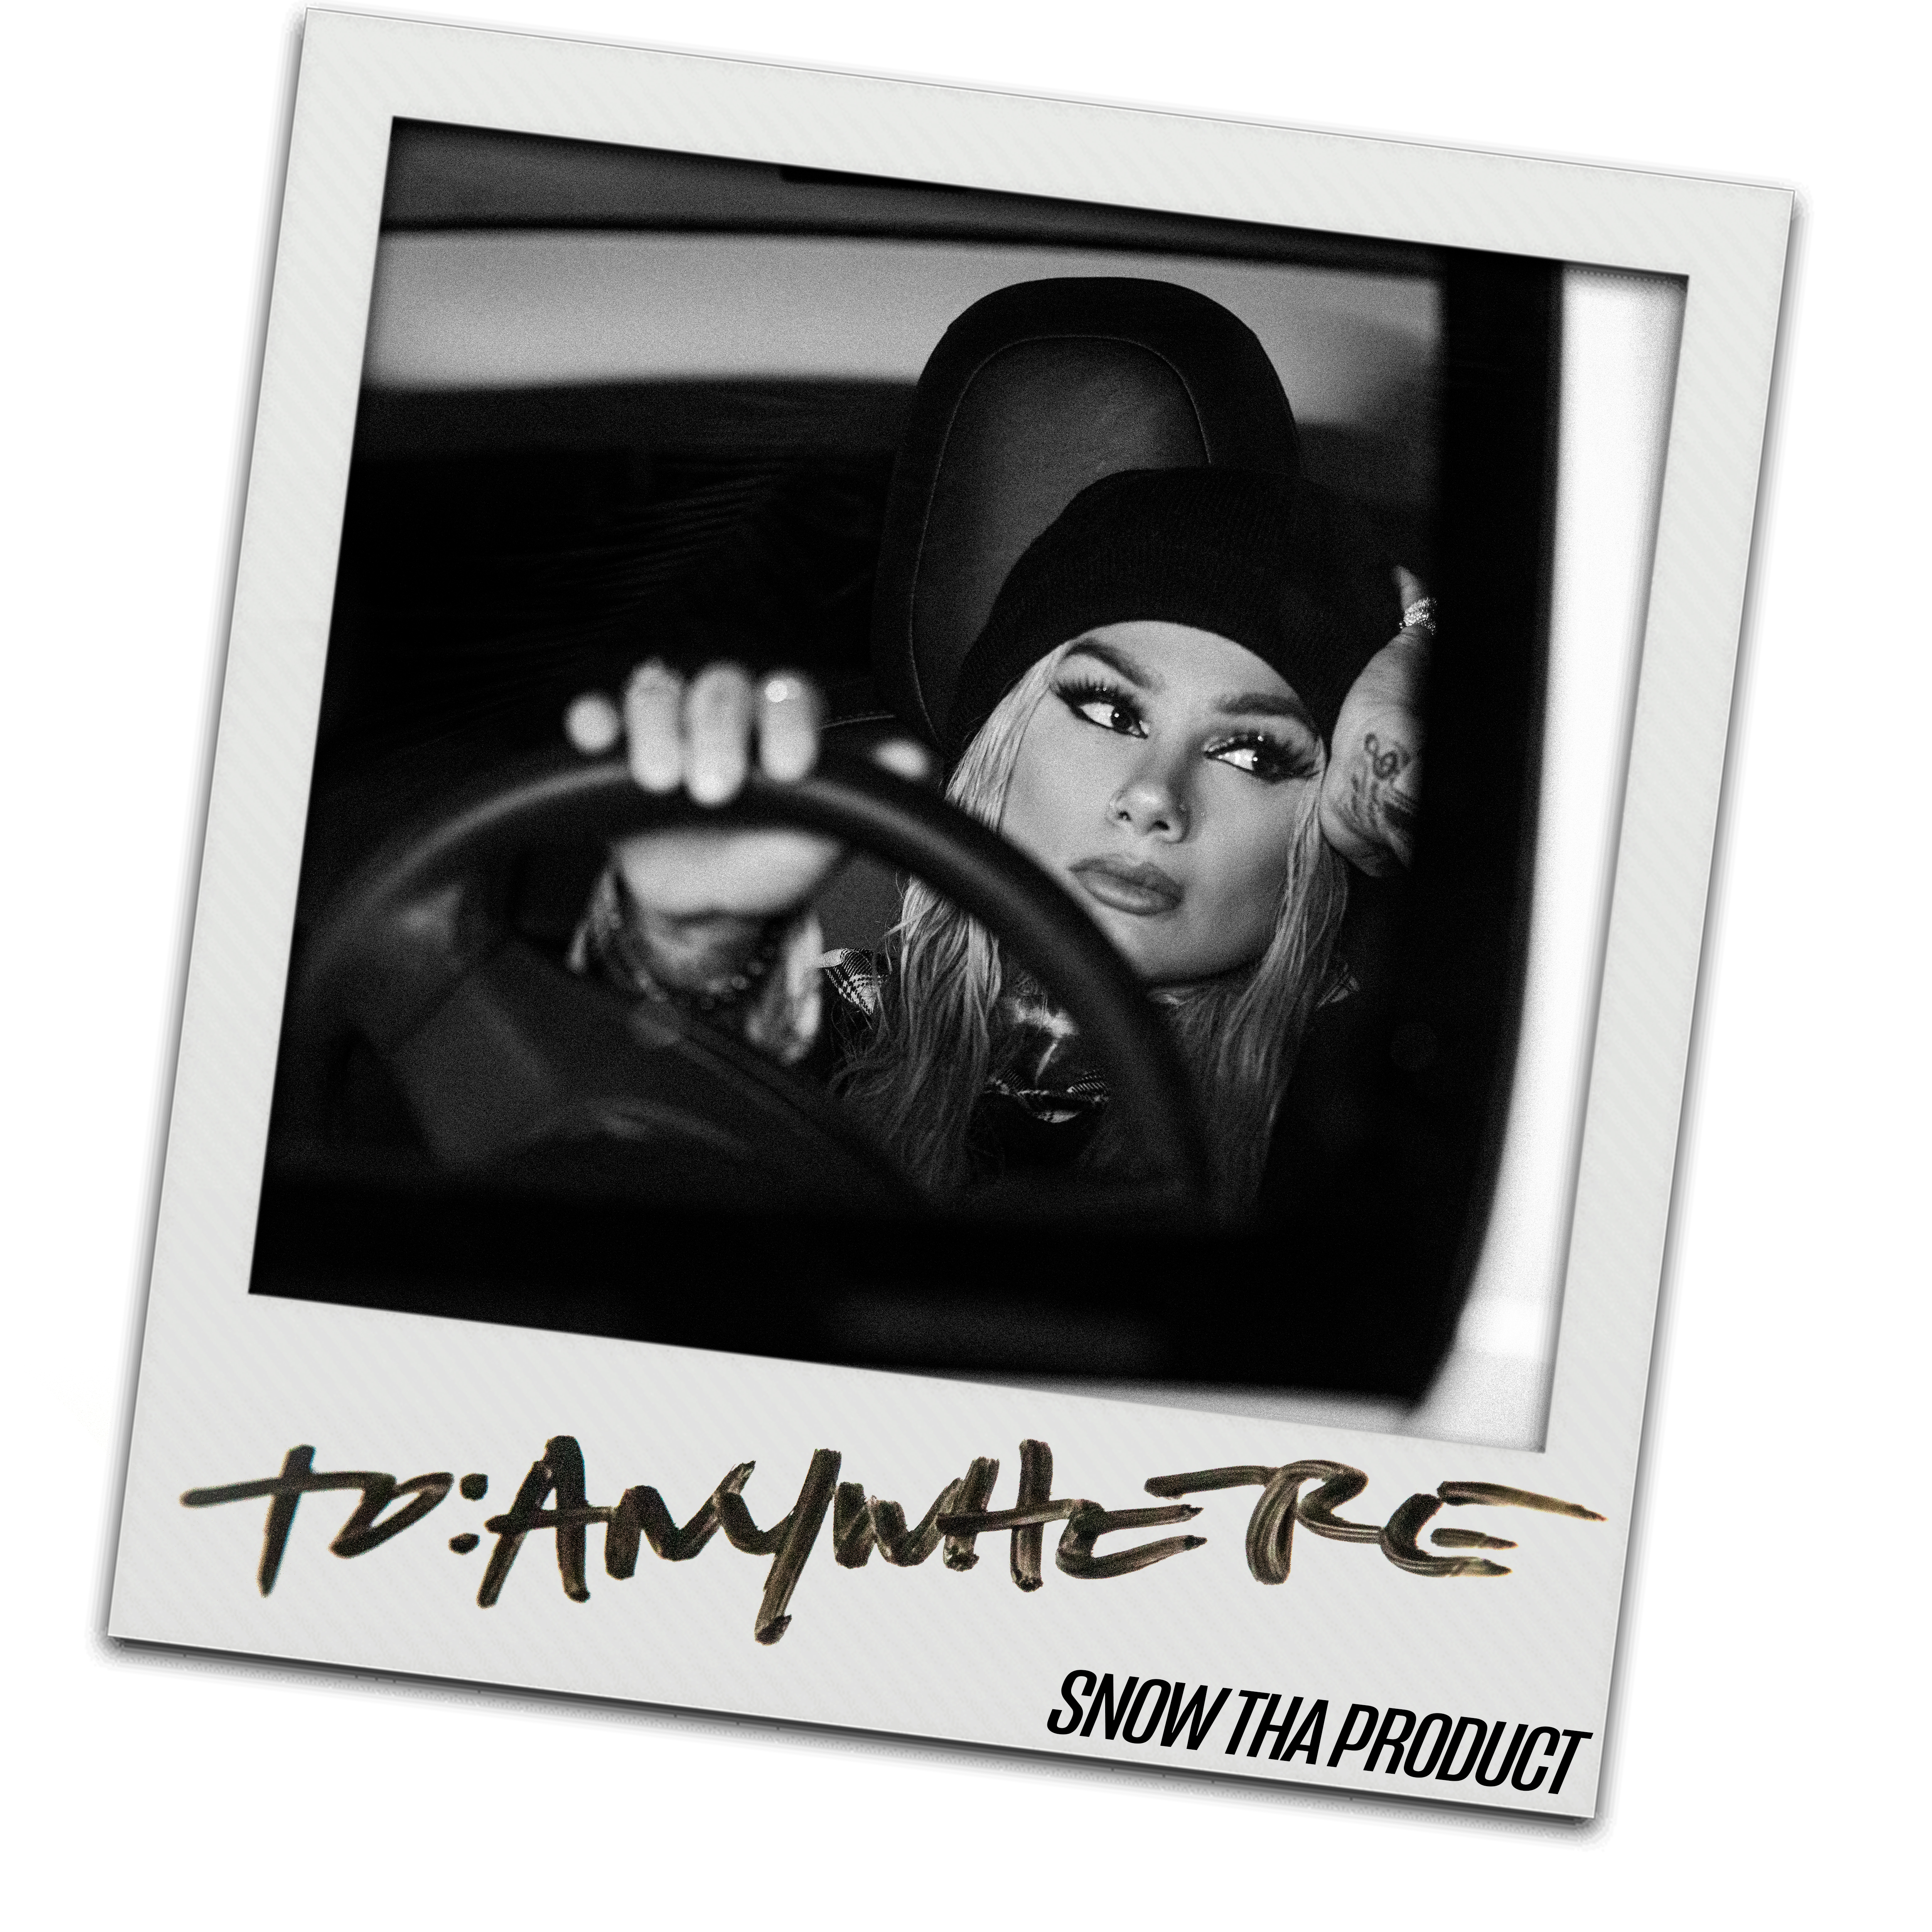 SNOW THA PRODUCT presenta nuevo material musical “To Anywhere”